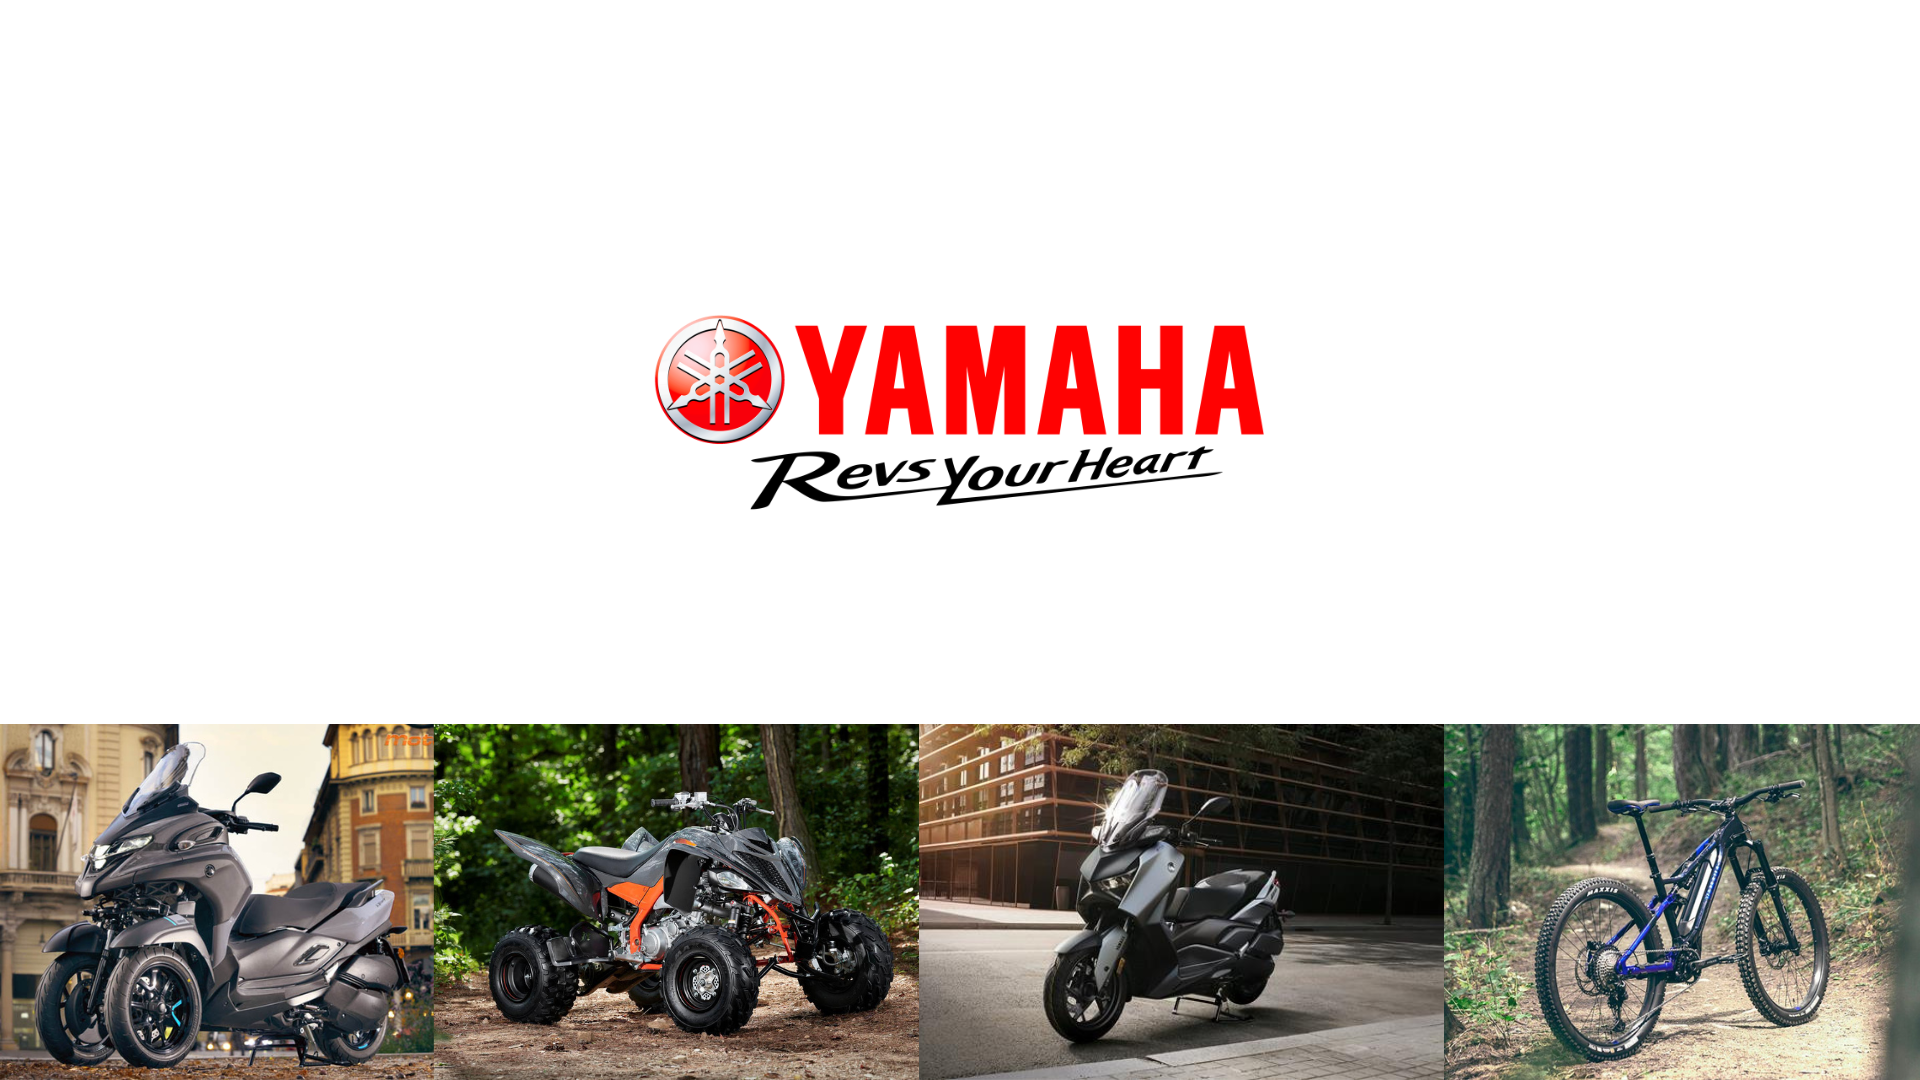 CEJE welcomes Yamaha Motor Europe as new partner